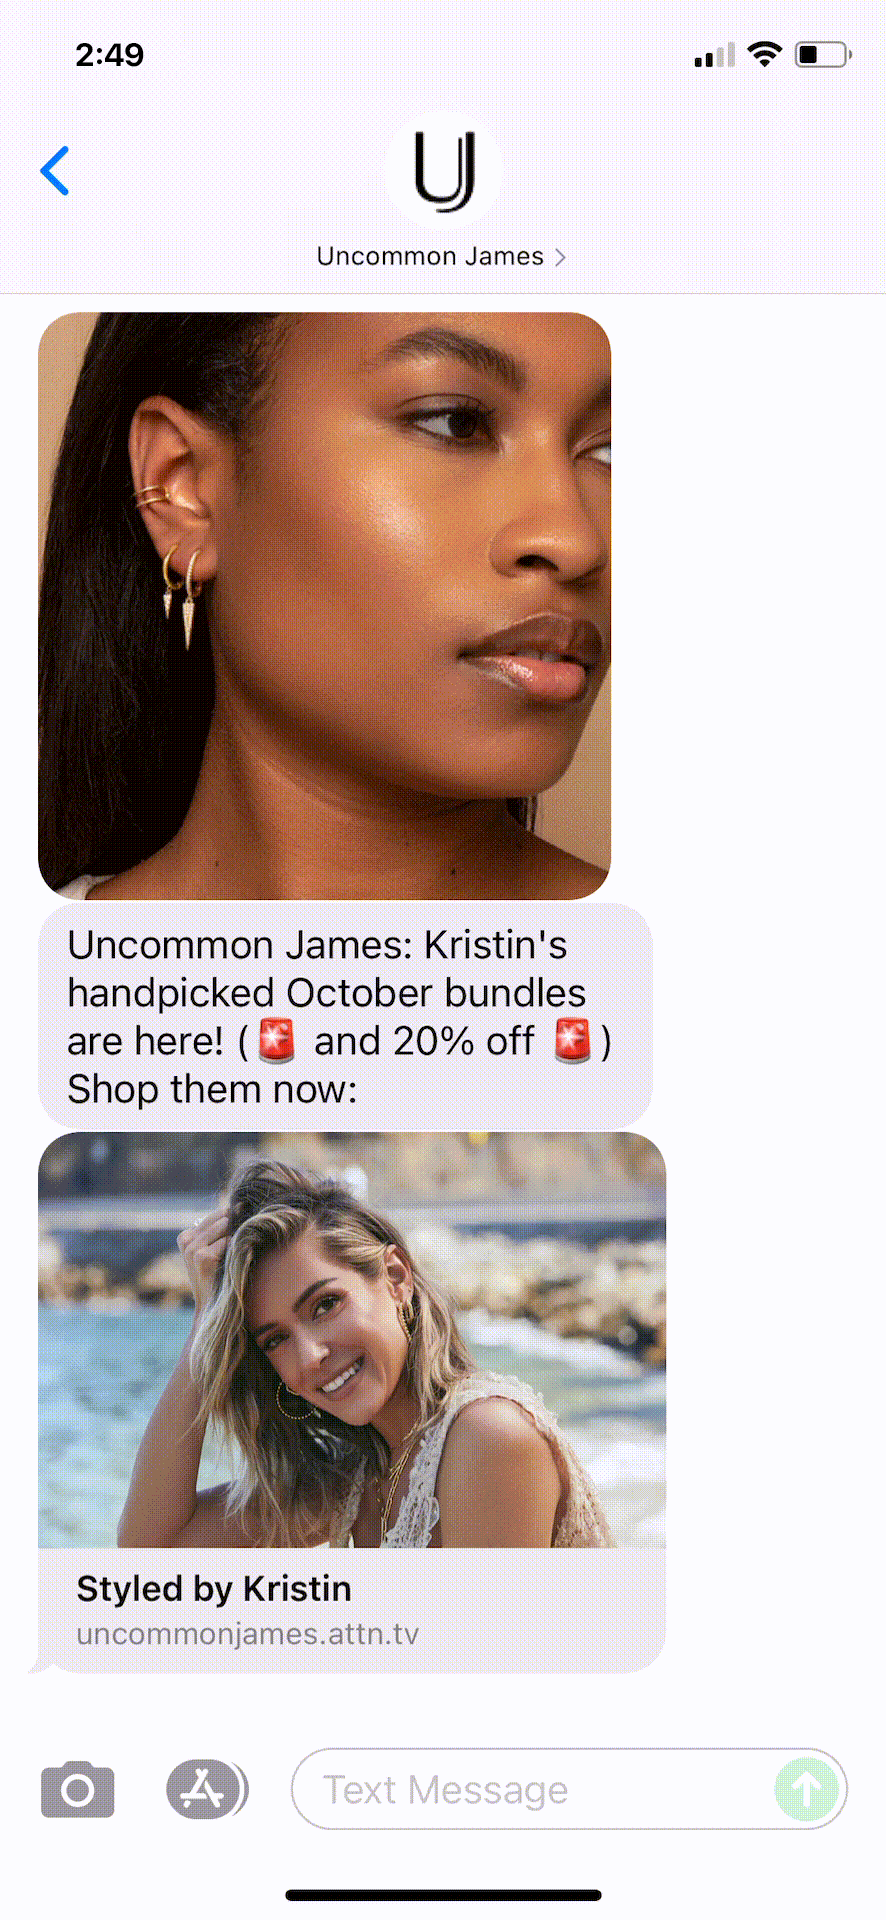 Uncommon-James-Text-Message-Marketing-Example-10.15.2021